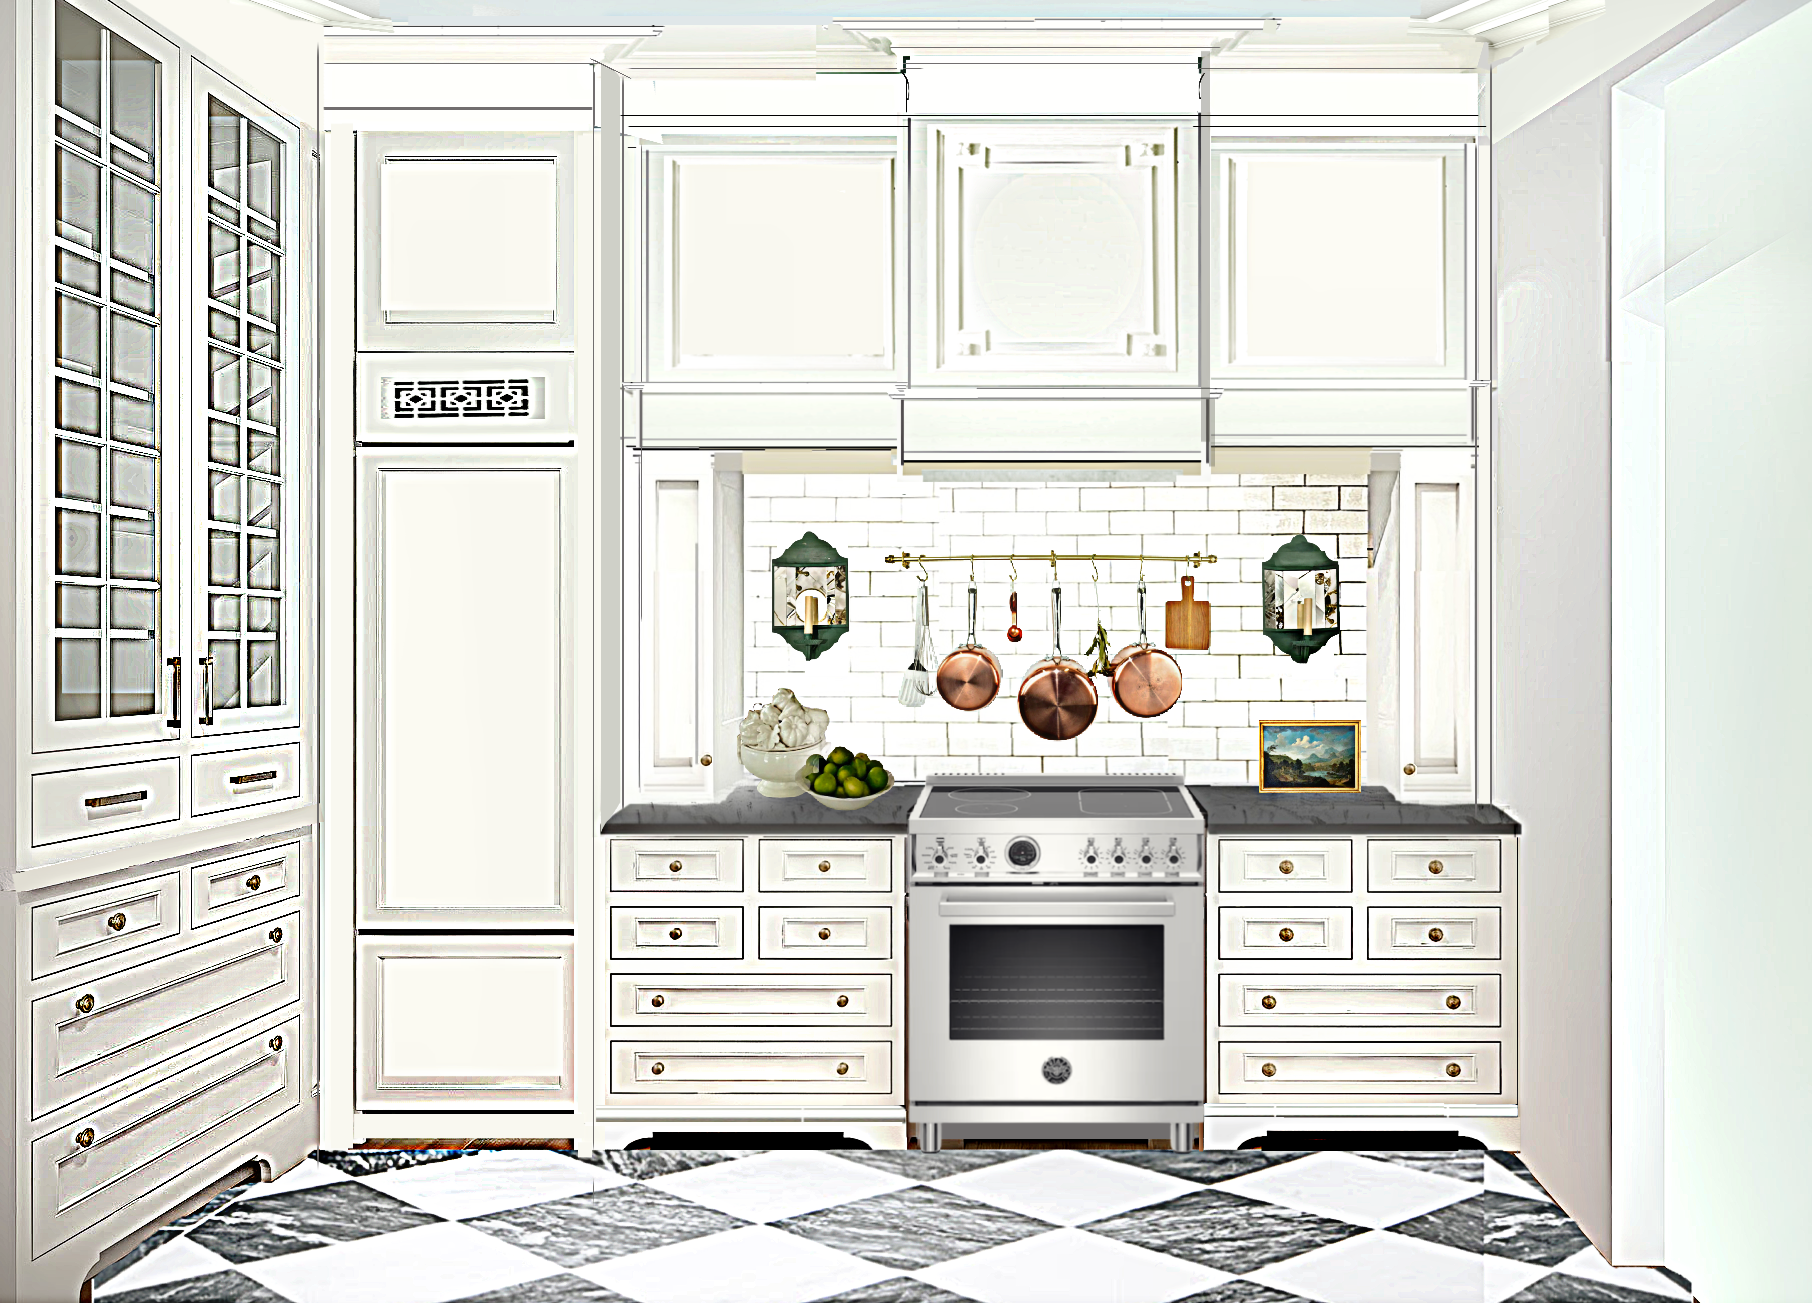 range wall corrected soapstone counter counter French hood with Victorian coving crown- renovation plans